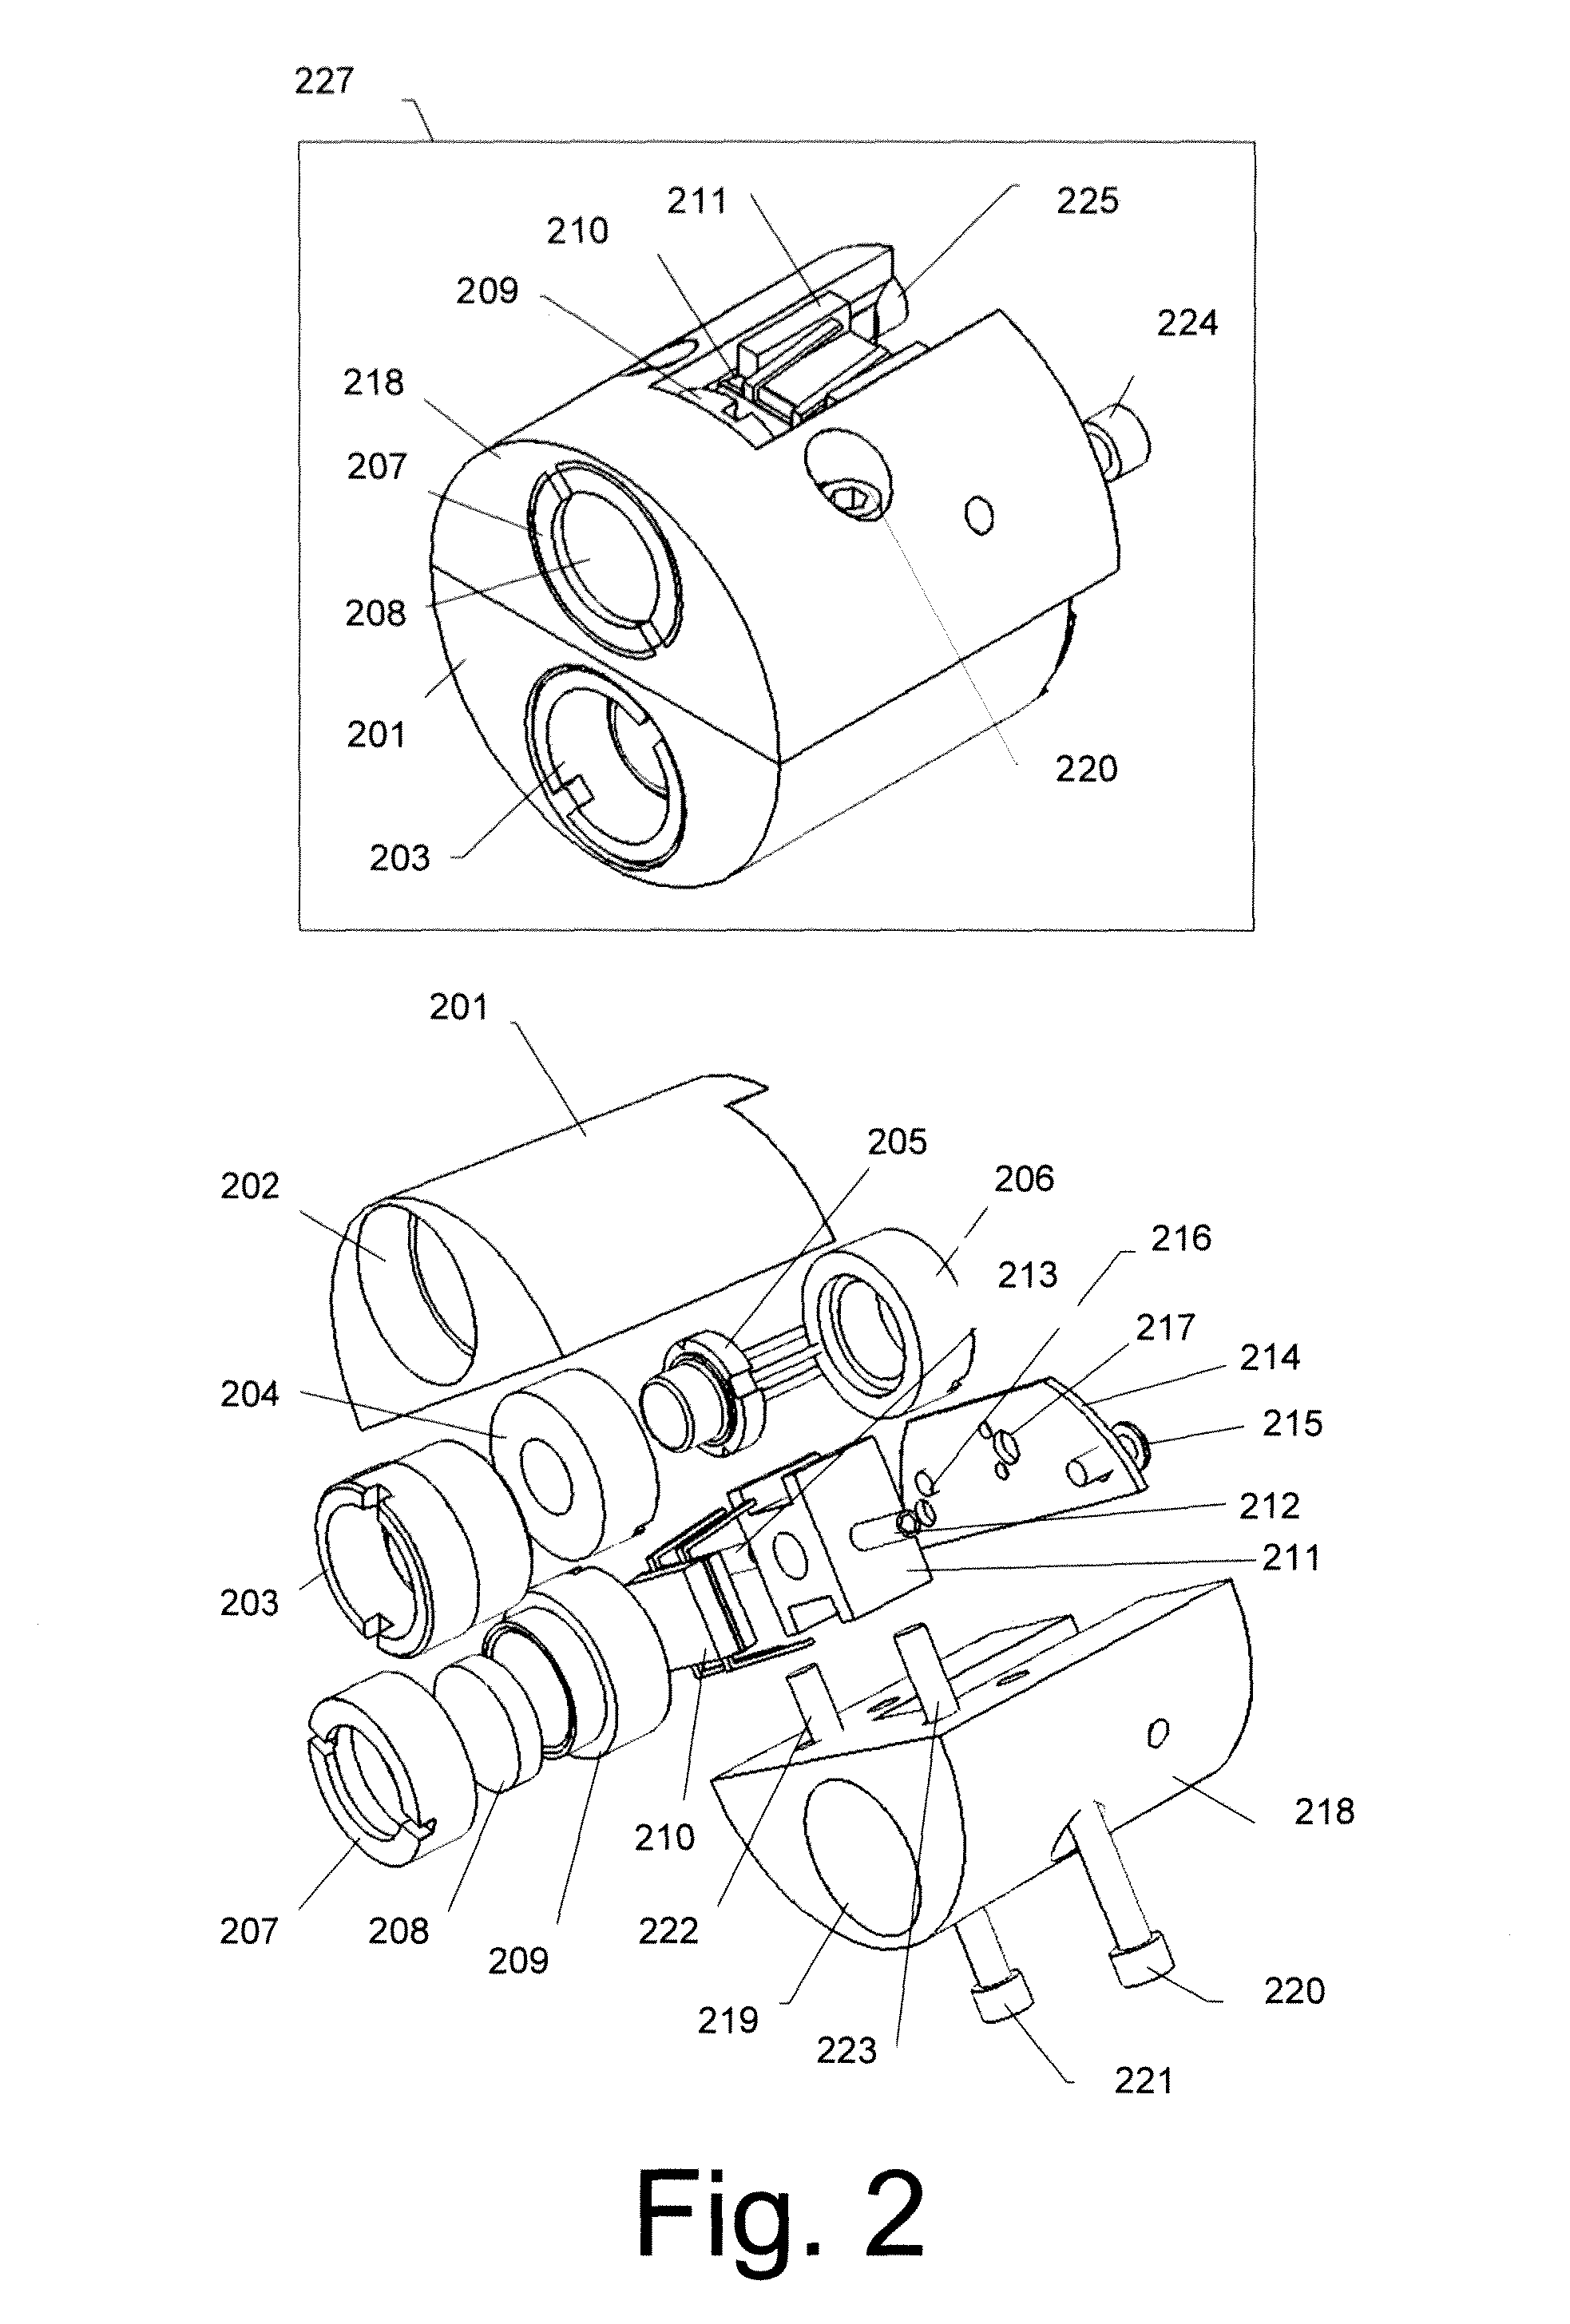 Optical impact control system